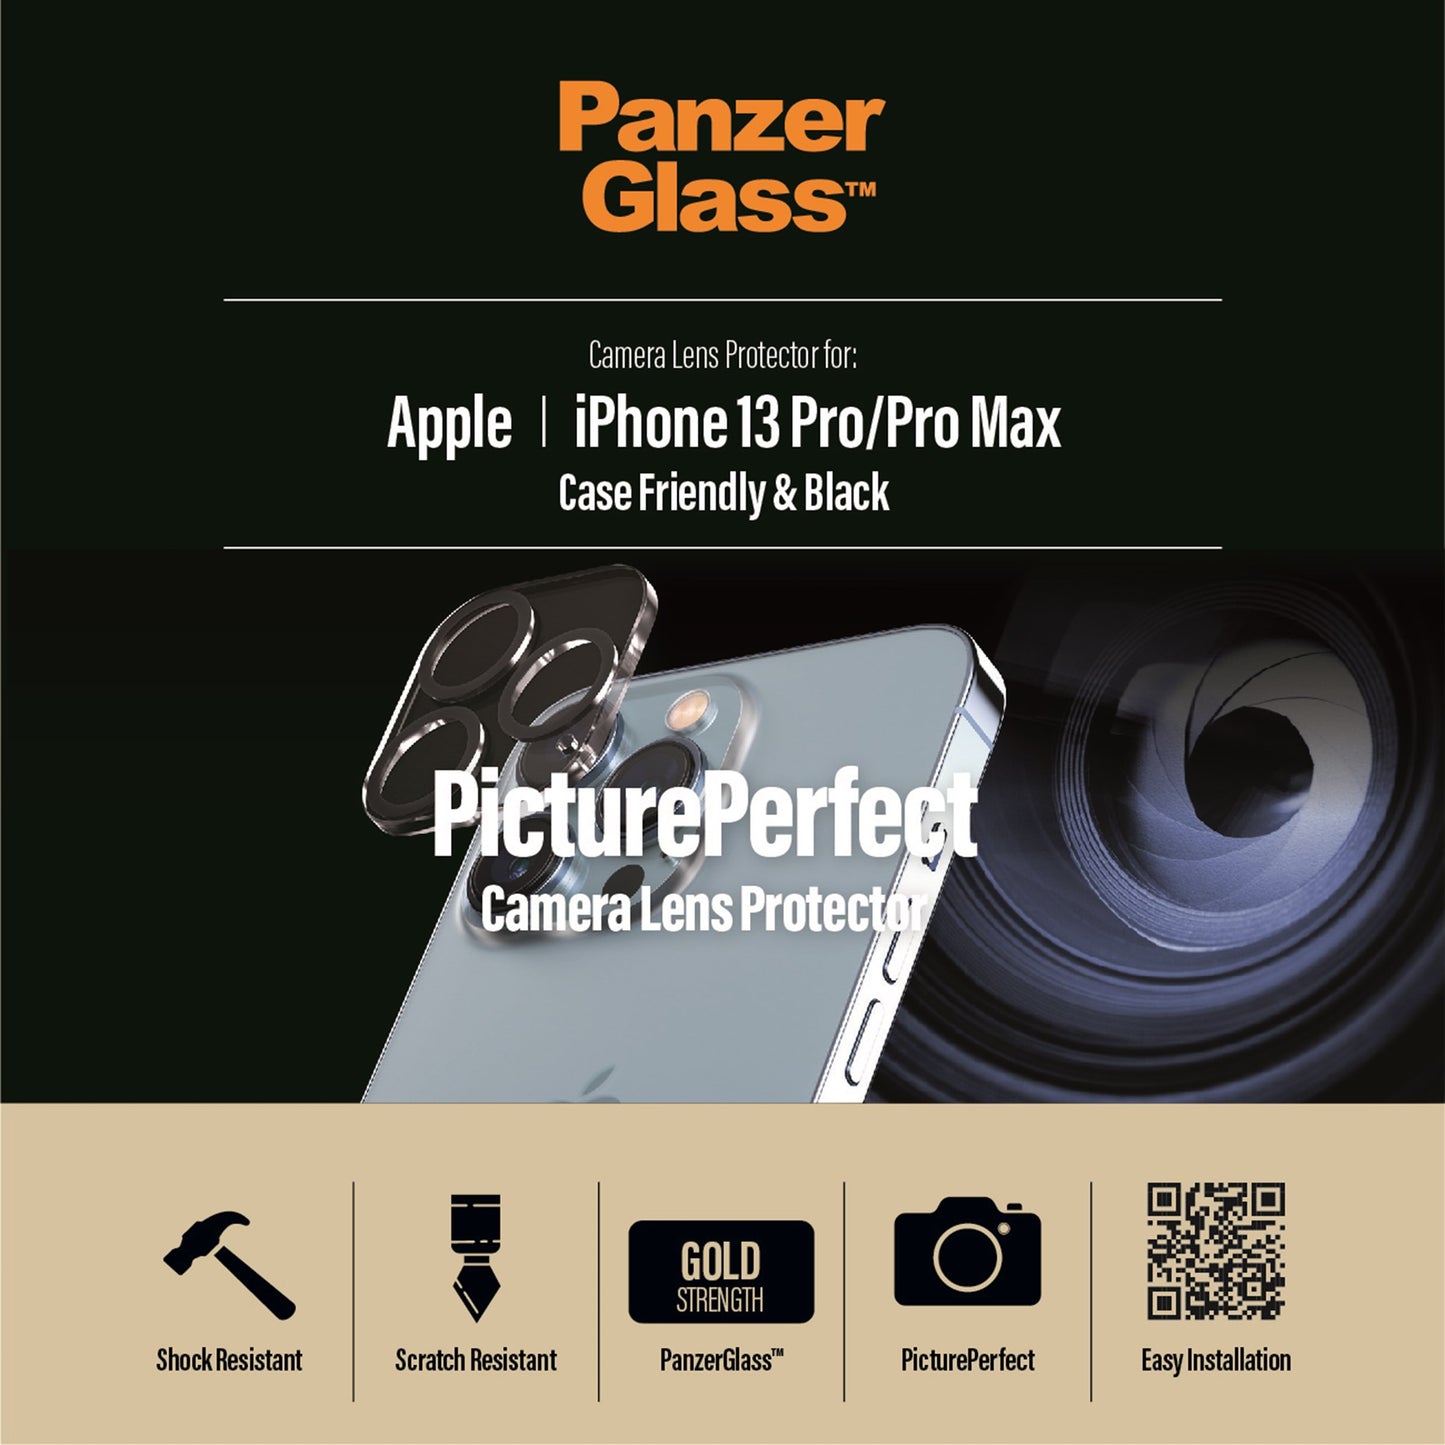 PanzerGlass™ PicturePerfect Camera Lens Protector Apple iPhone 13 Pro | Pro Max 9